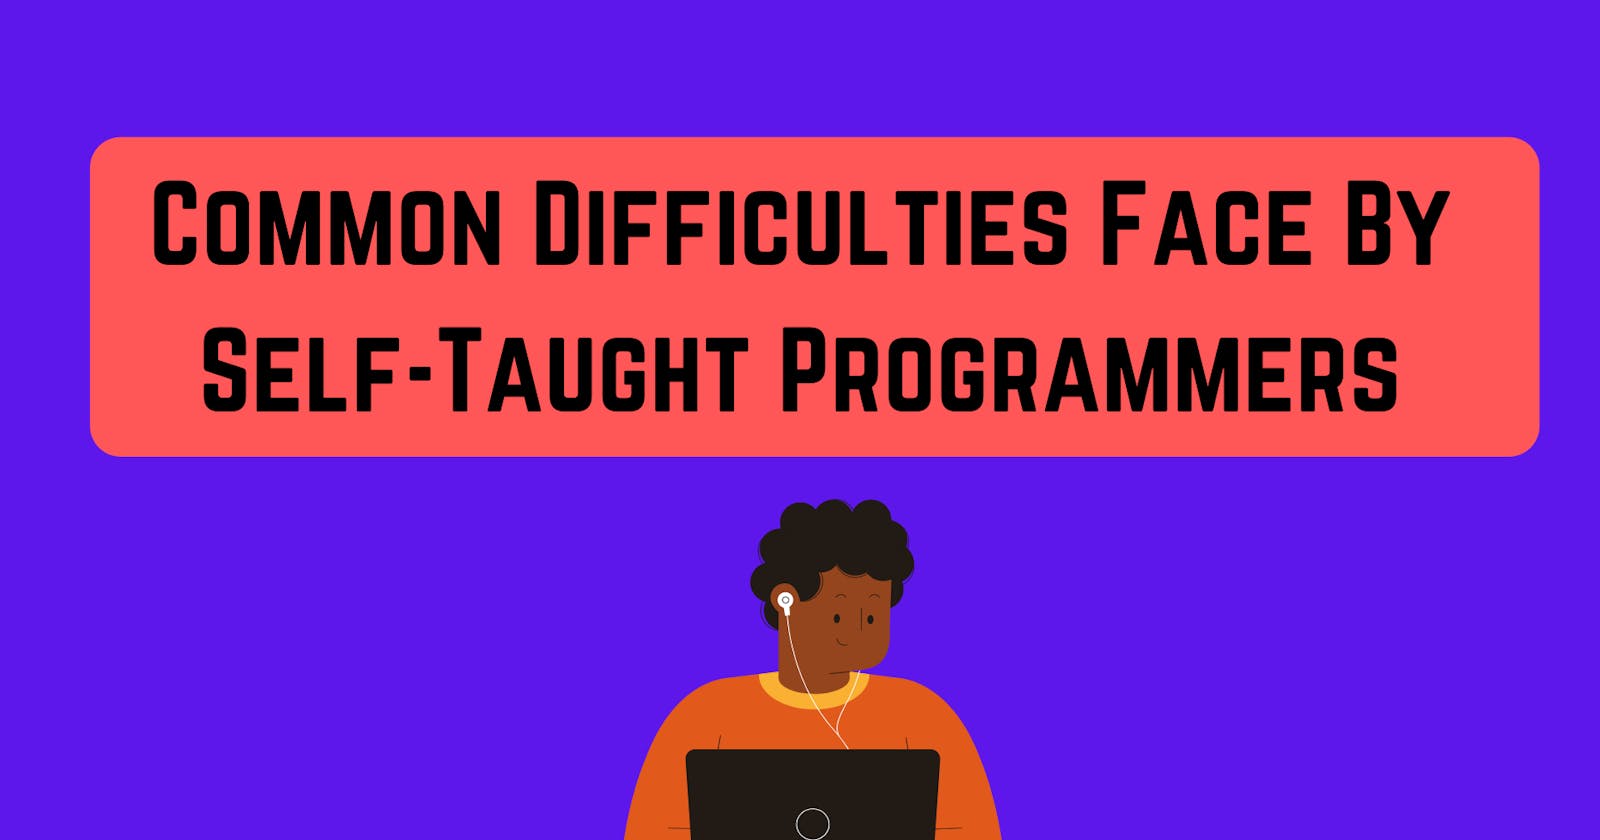 Common Difficulties Face By Self-Taught Programmers